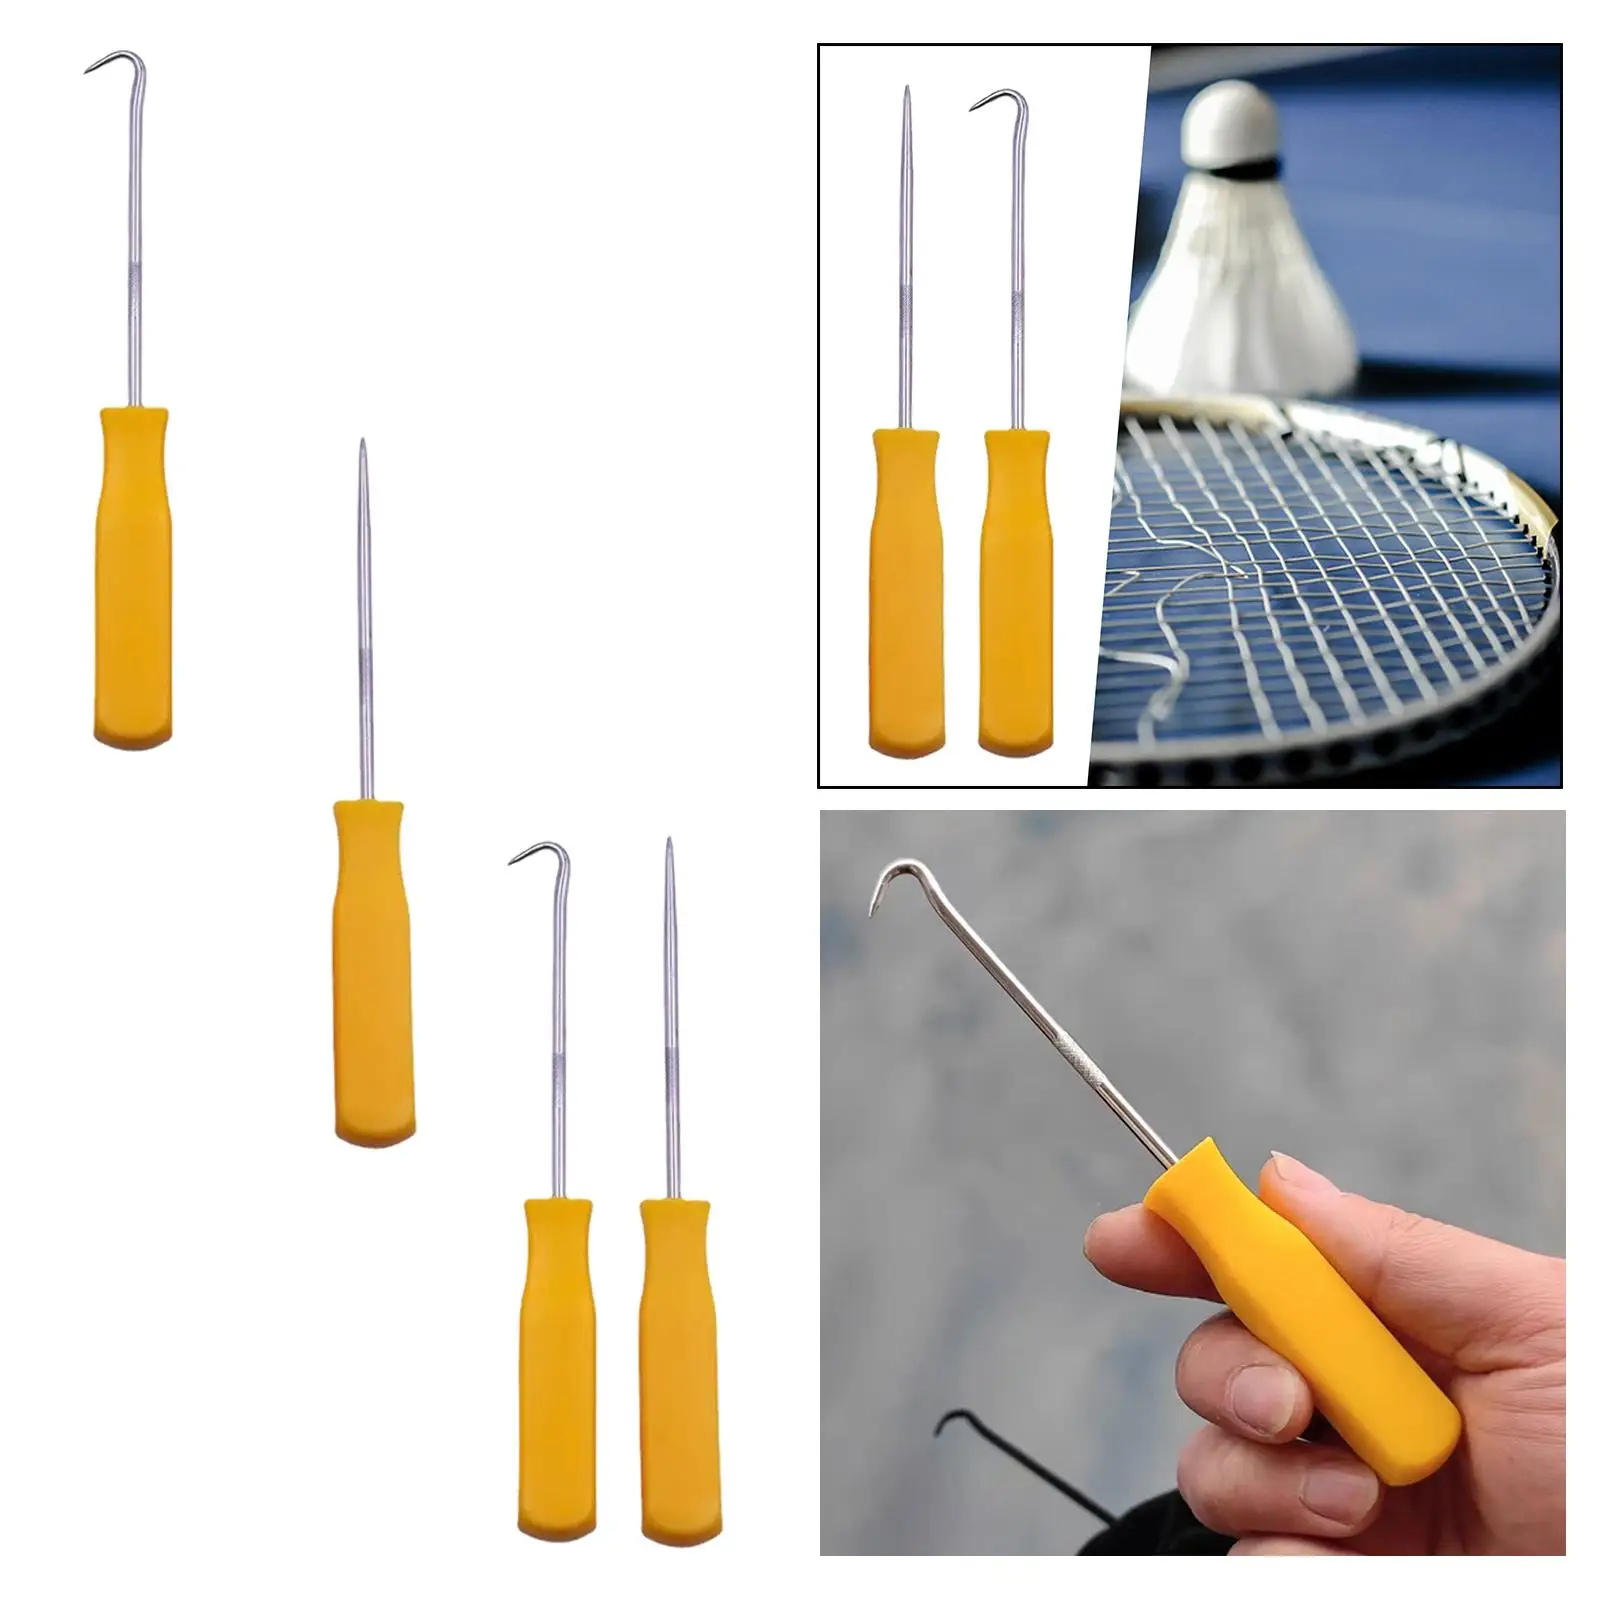 Racket Stringing Tool Convenient to Use Sports Tennis Stringing Machine Tool